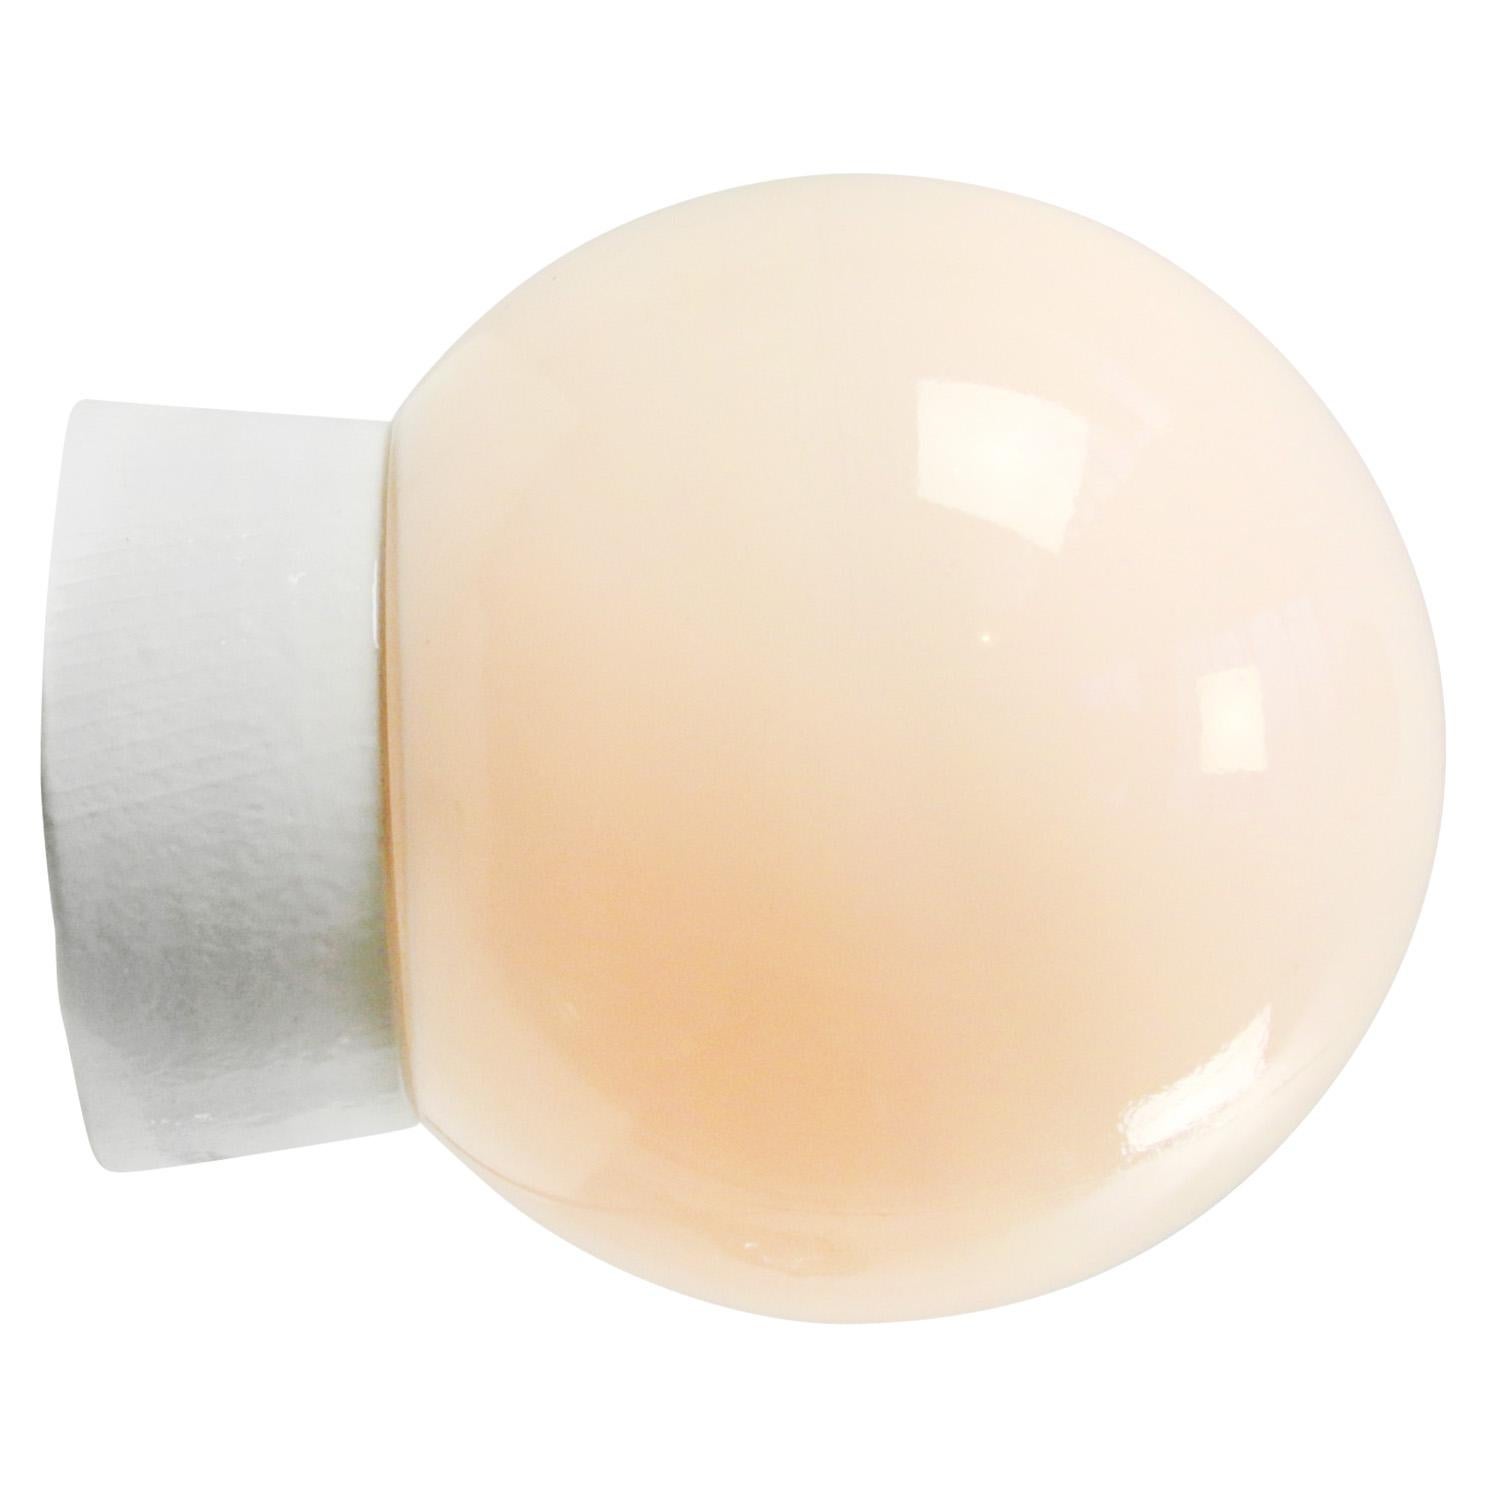 Industrial ceiling lamp.
White porcelain, white opaline glass.
2 conductors, no ground.
Diameter base 12 cm / 4.72 Inches

Weight: 1.35 kg / 3 lb

Priced per individual item. All lamps have been made suitable by international standards for